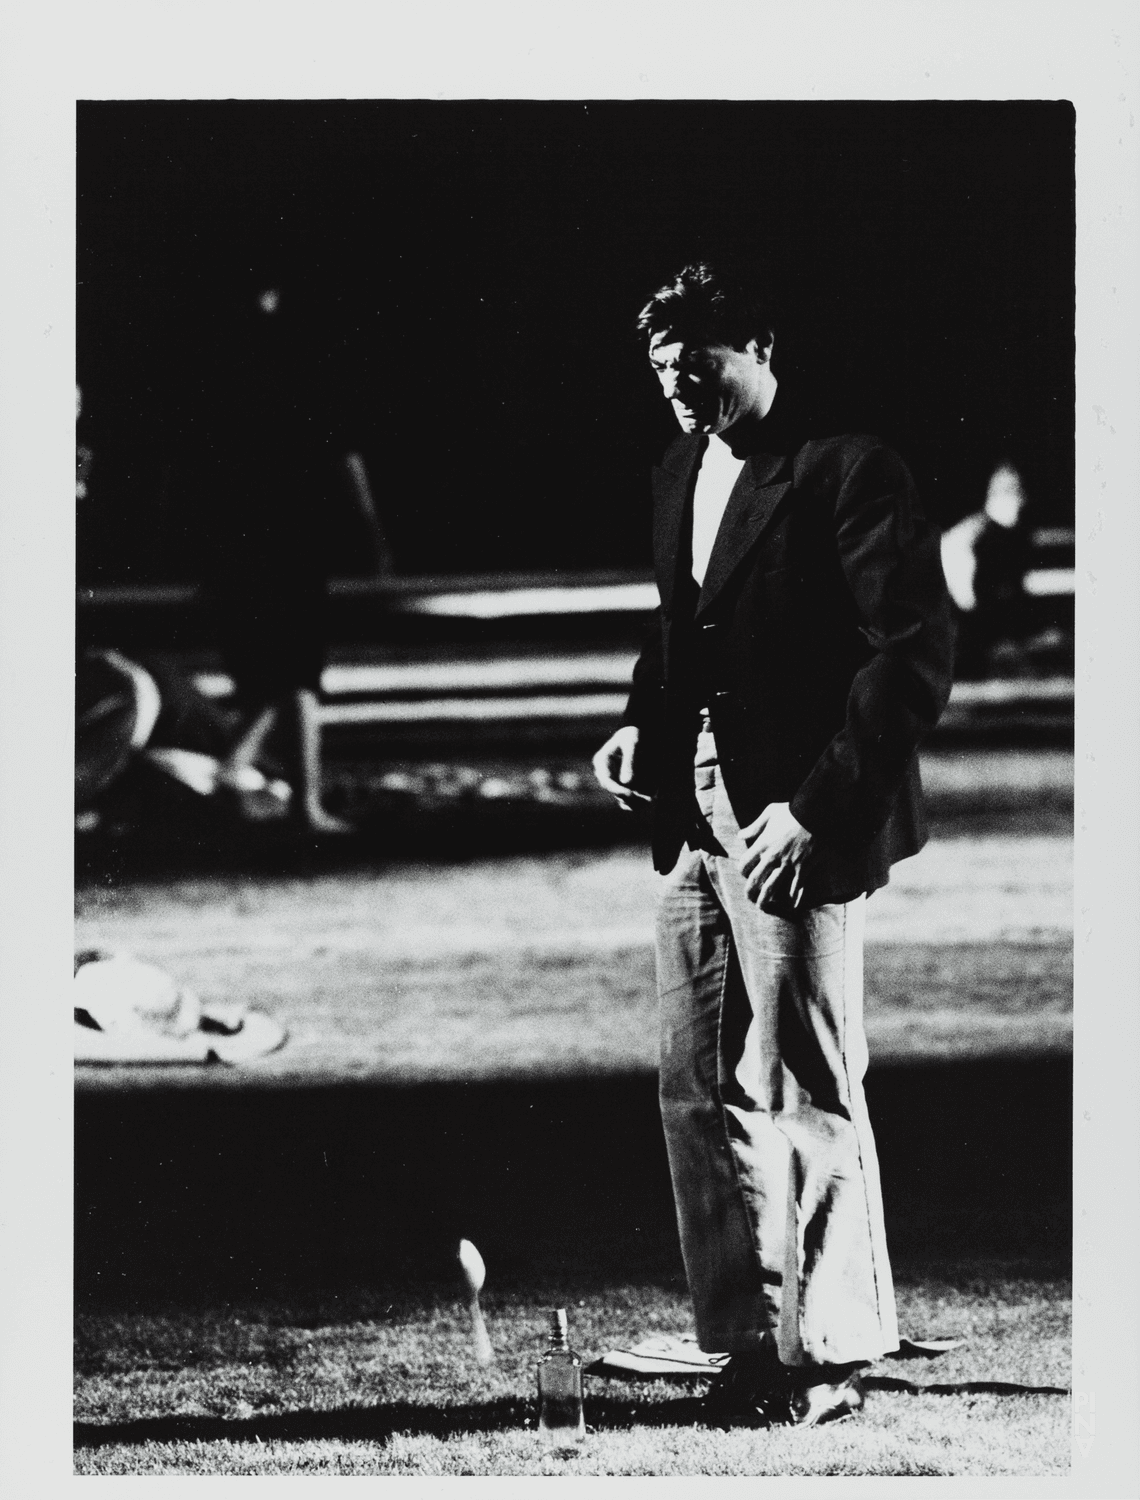 Antonio Carallo in “1980 – A Piece by Pina Bausch” by Pina Bausch